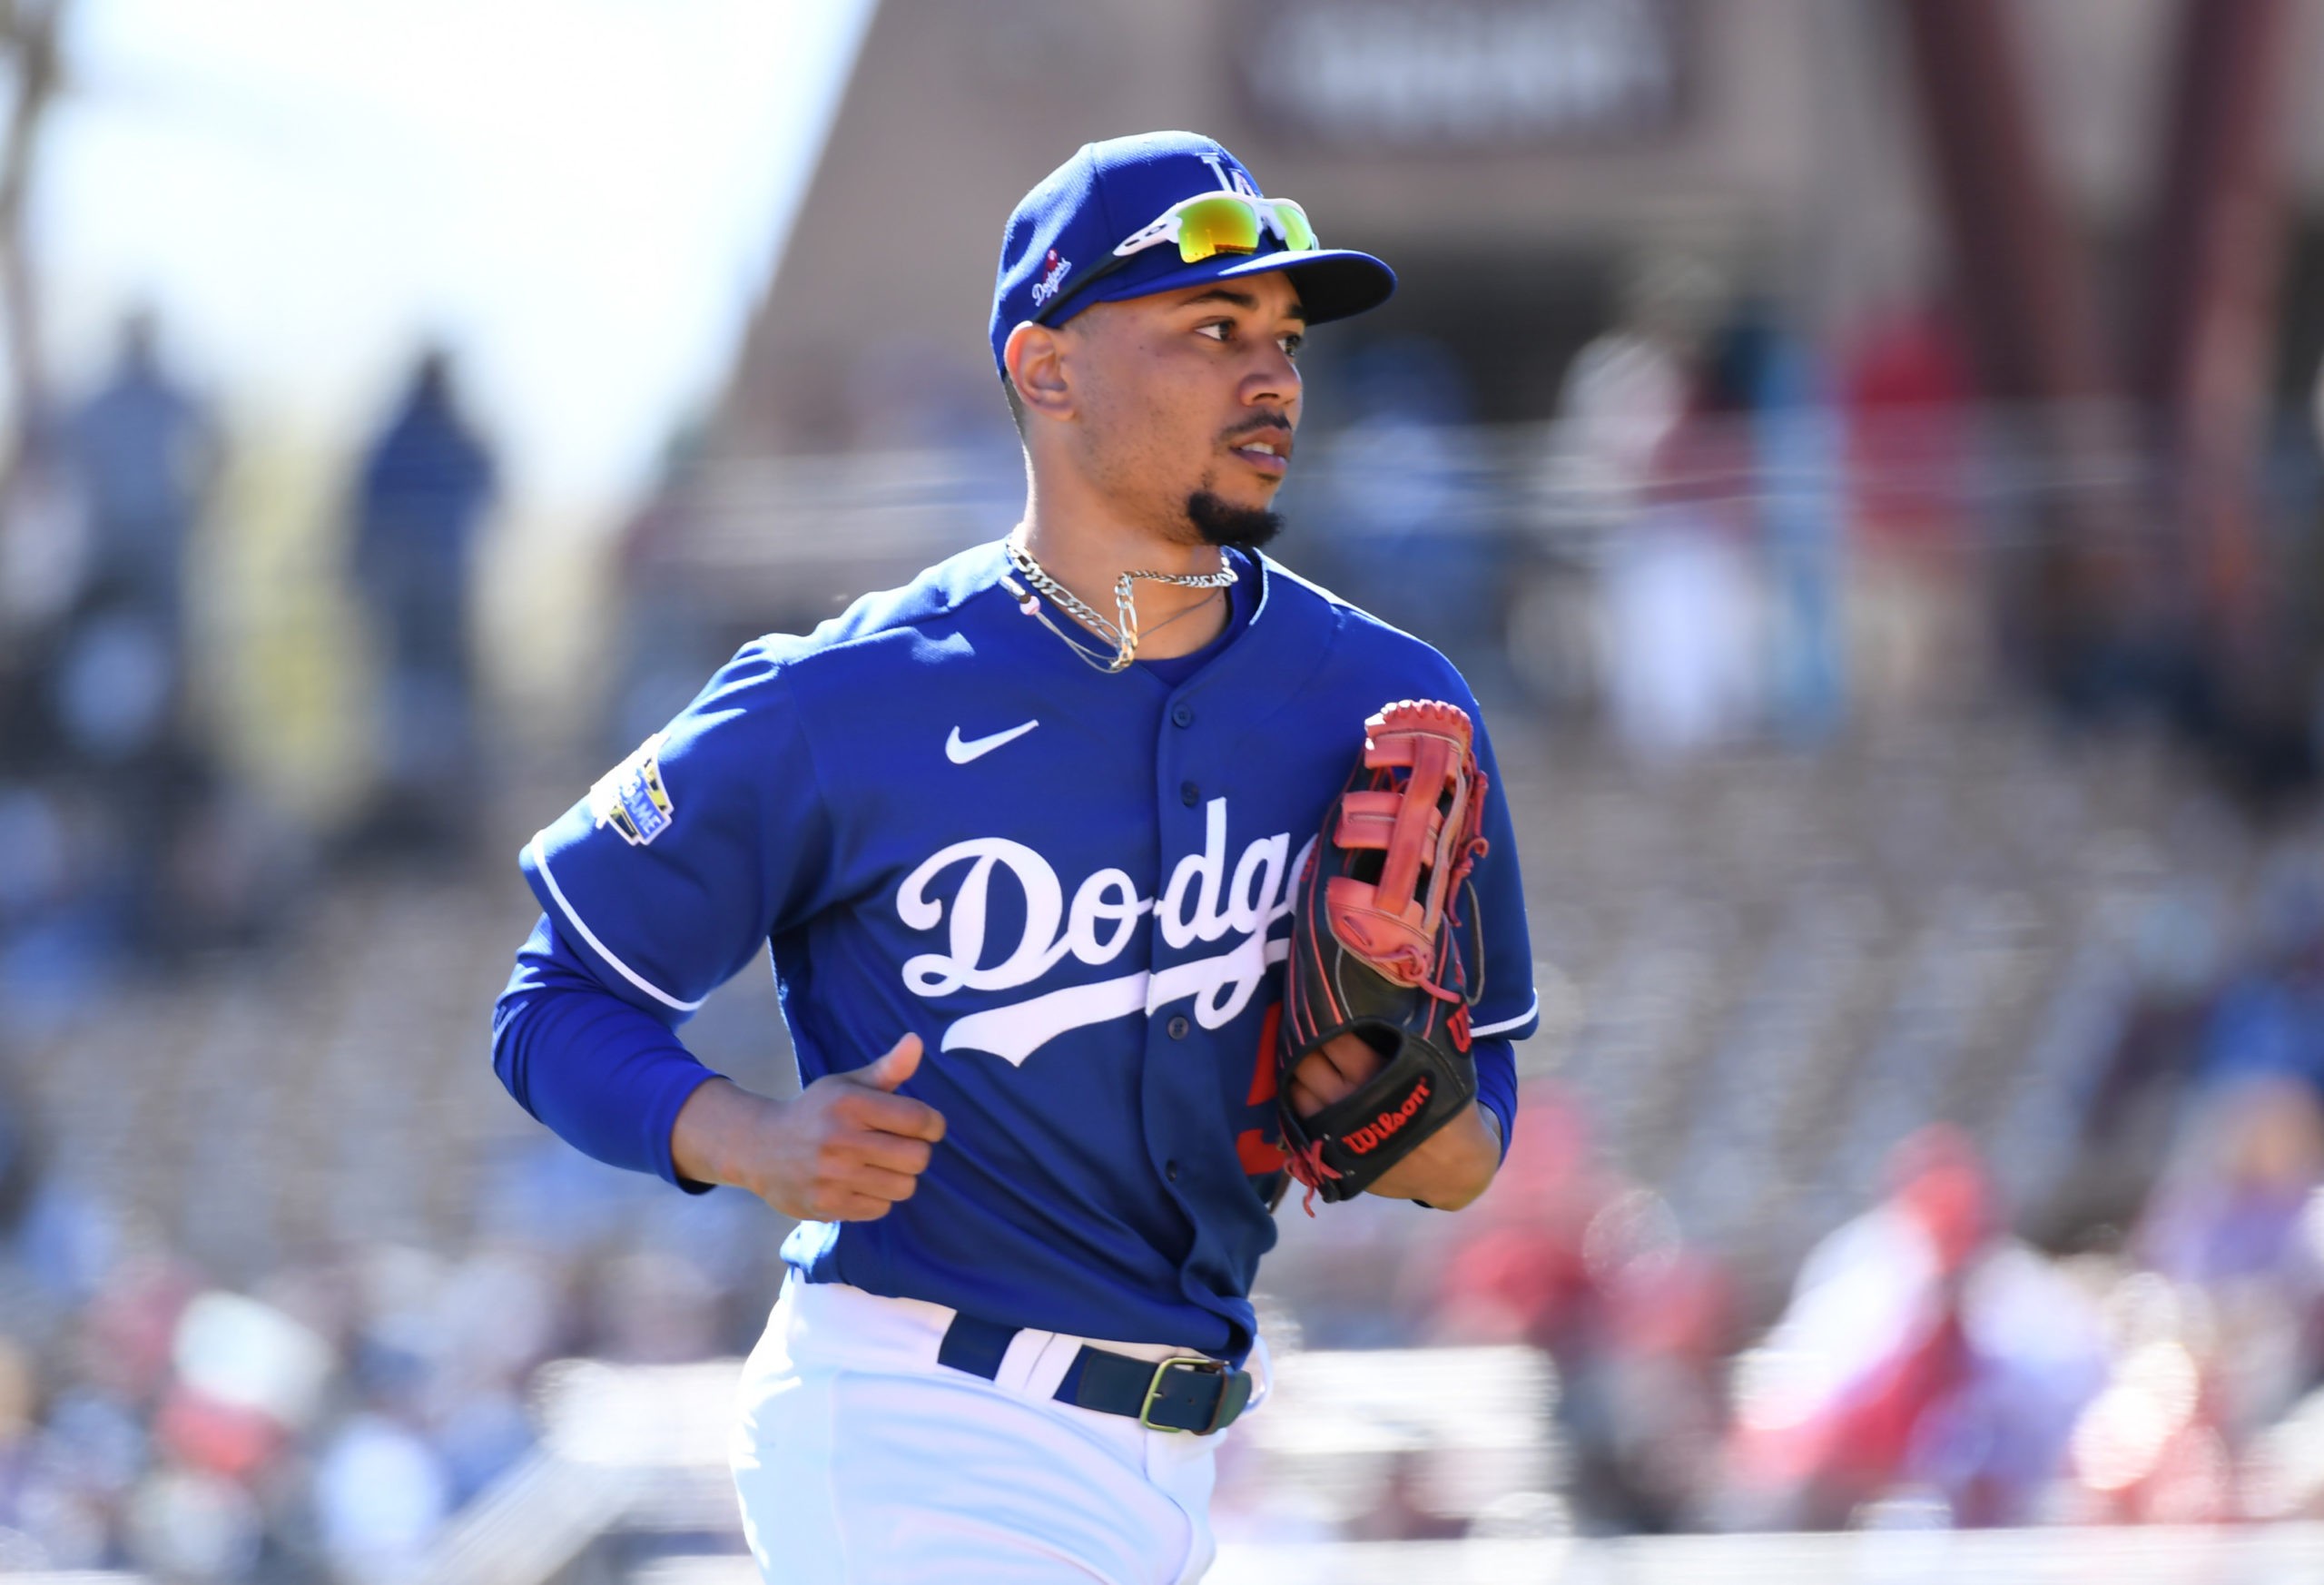 Mookie Betts #50 of the Los Angeles Dodgers (Photo by Norm Hall/Getty Images)